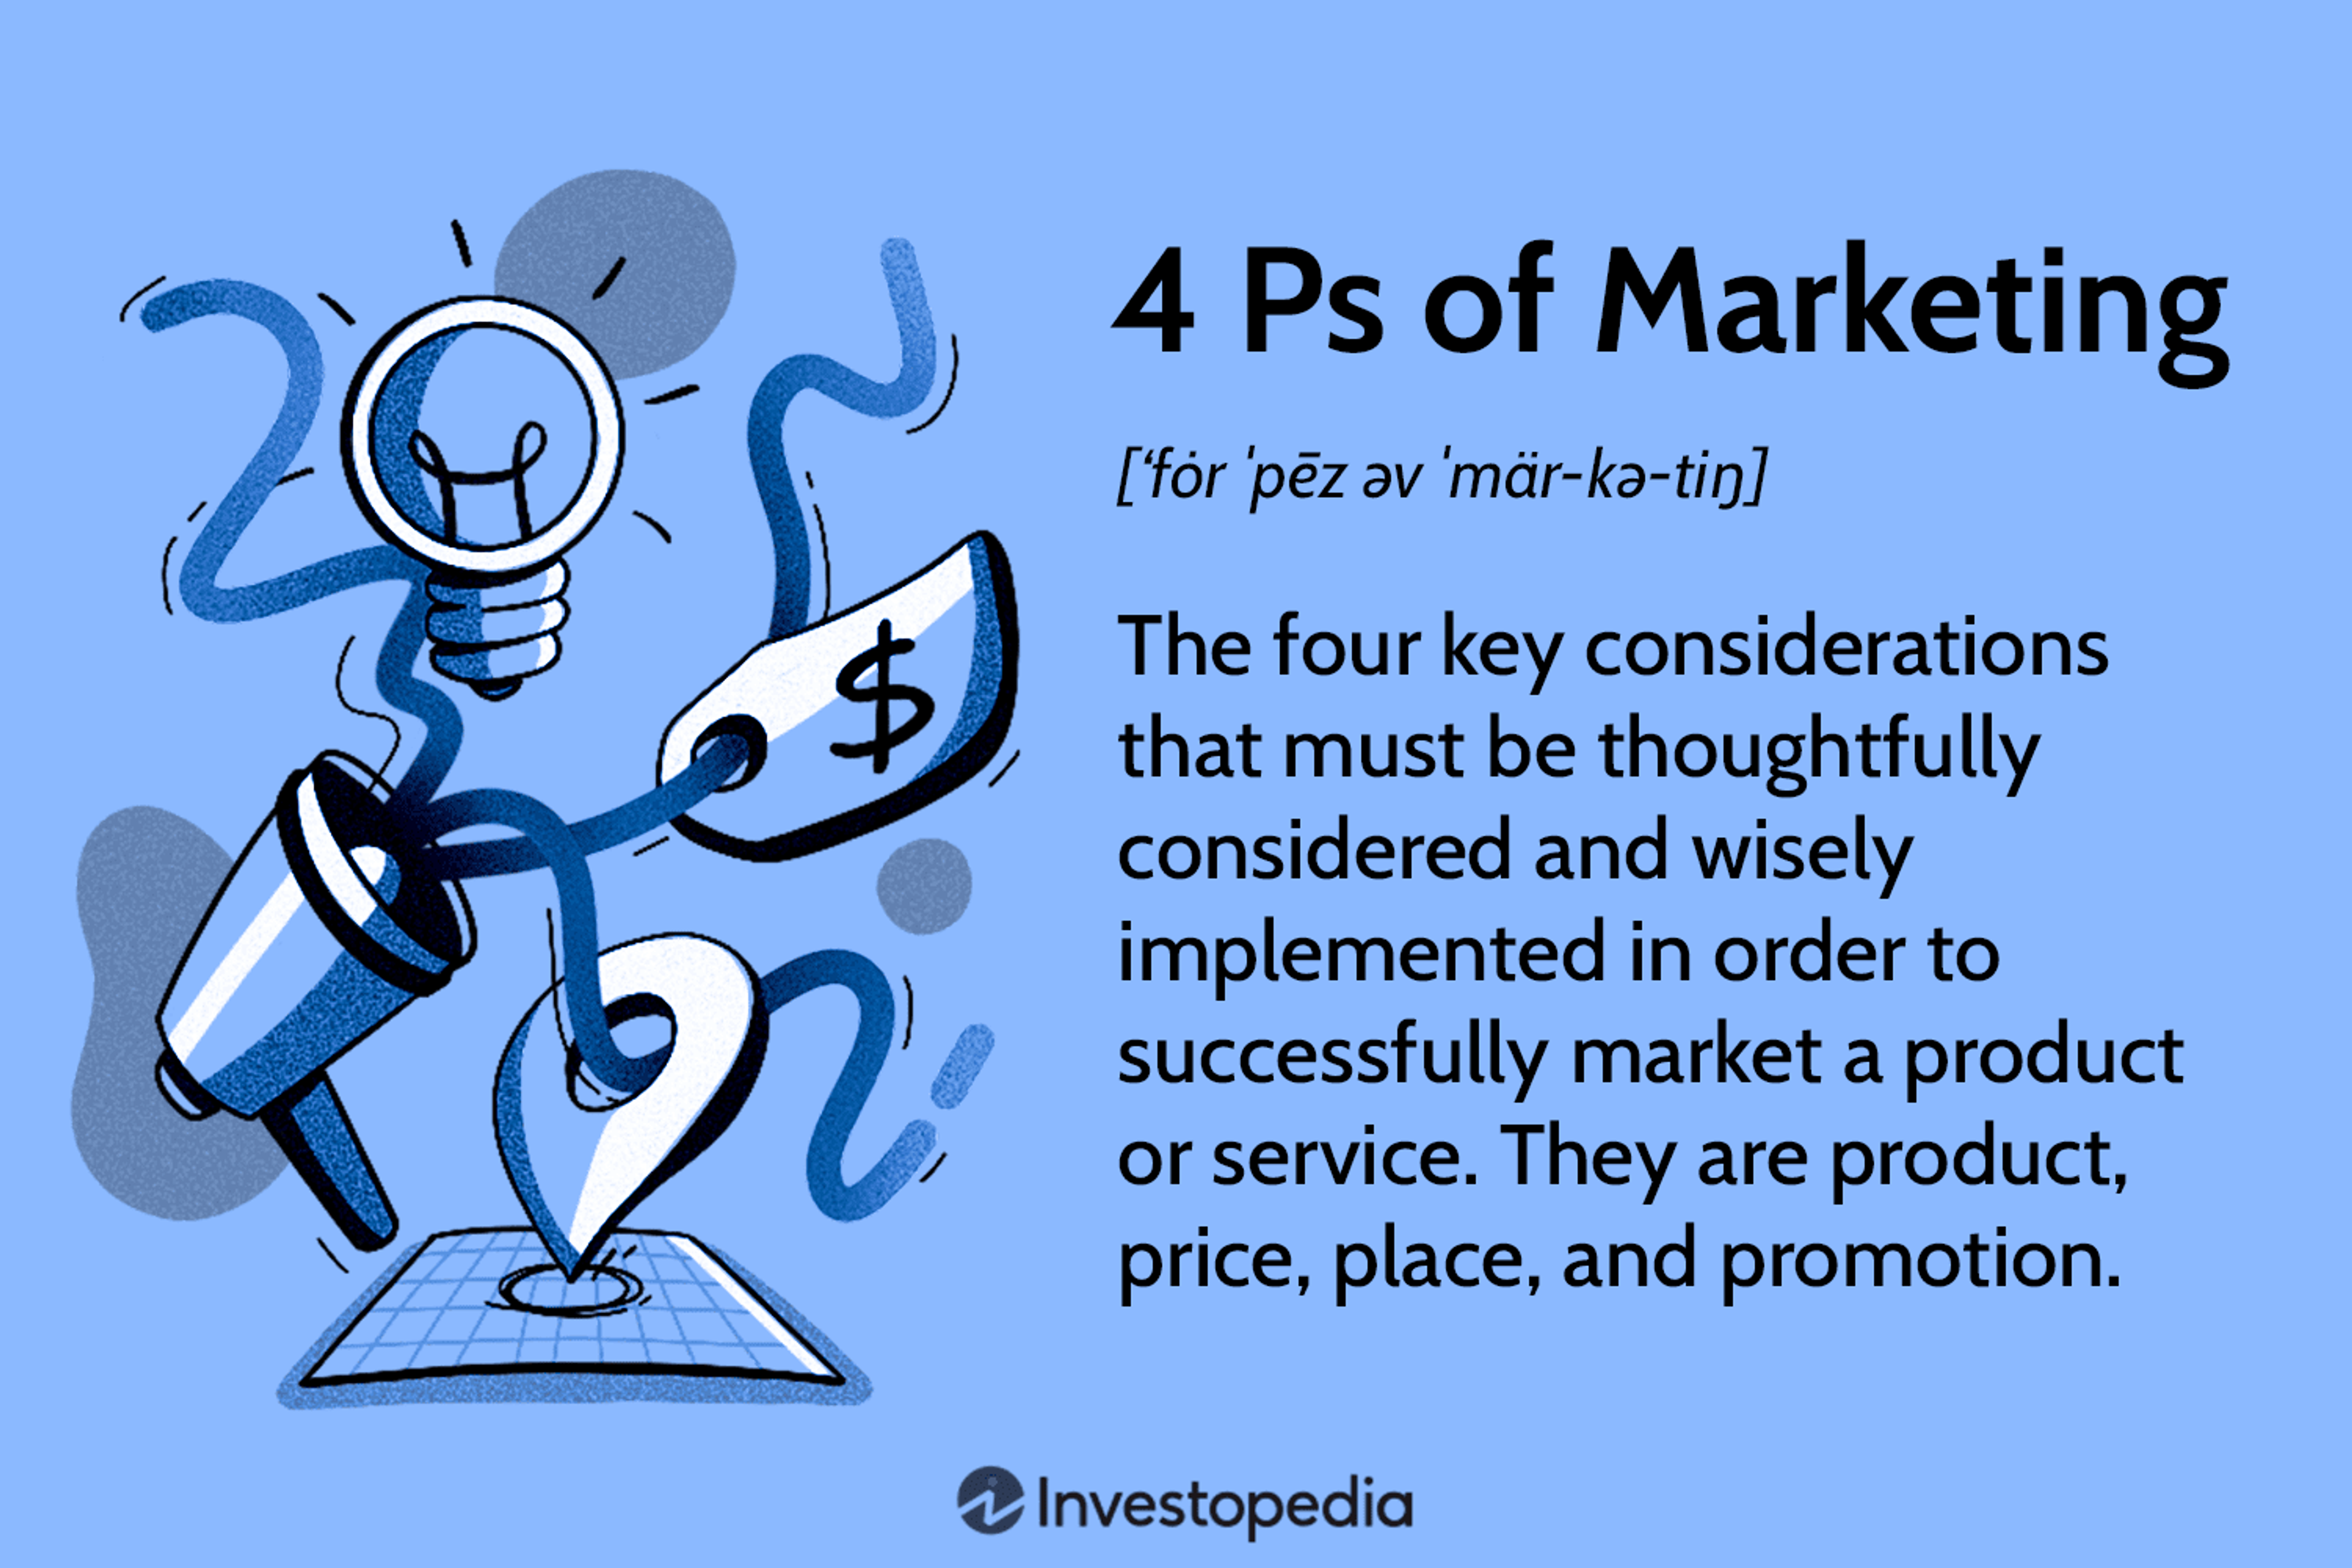 Illustration of the 4Ps of Marketing by Investopedia.